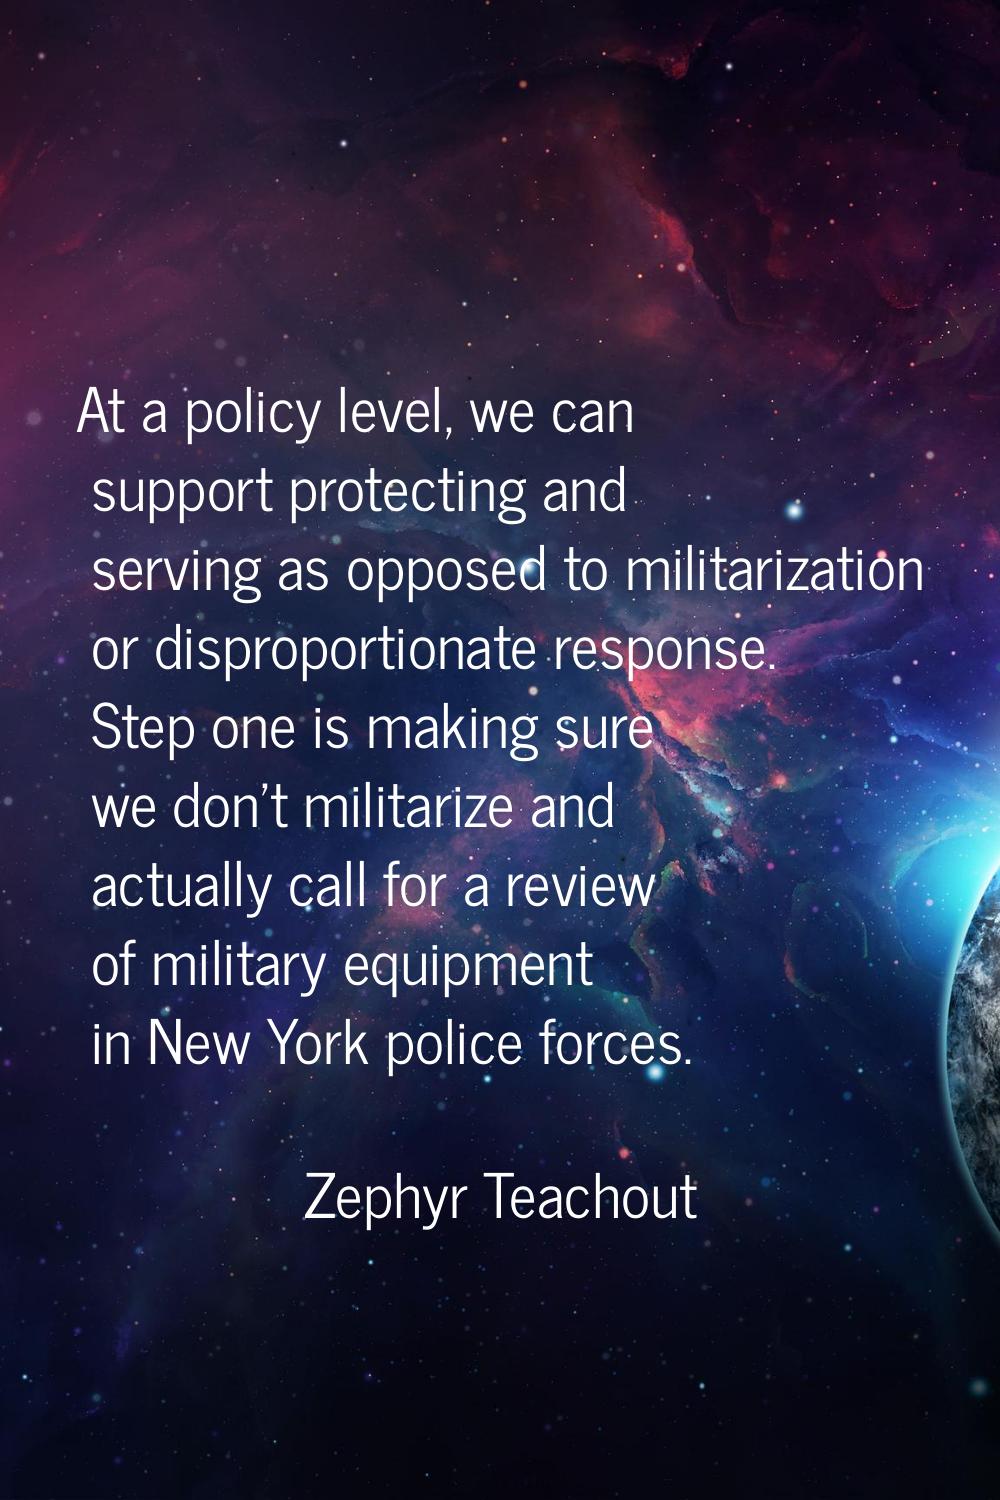 At a policy level, we can support protecting and serving as opposed to militarization or disproport